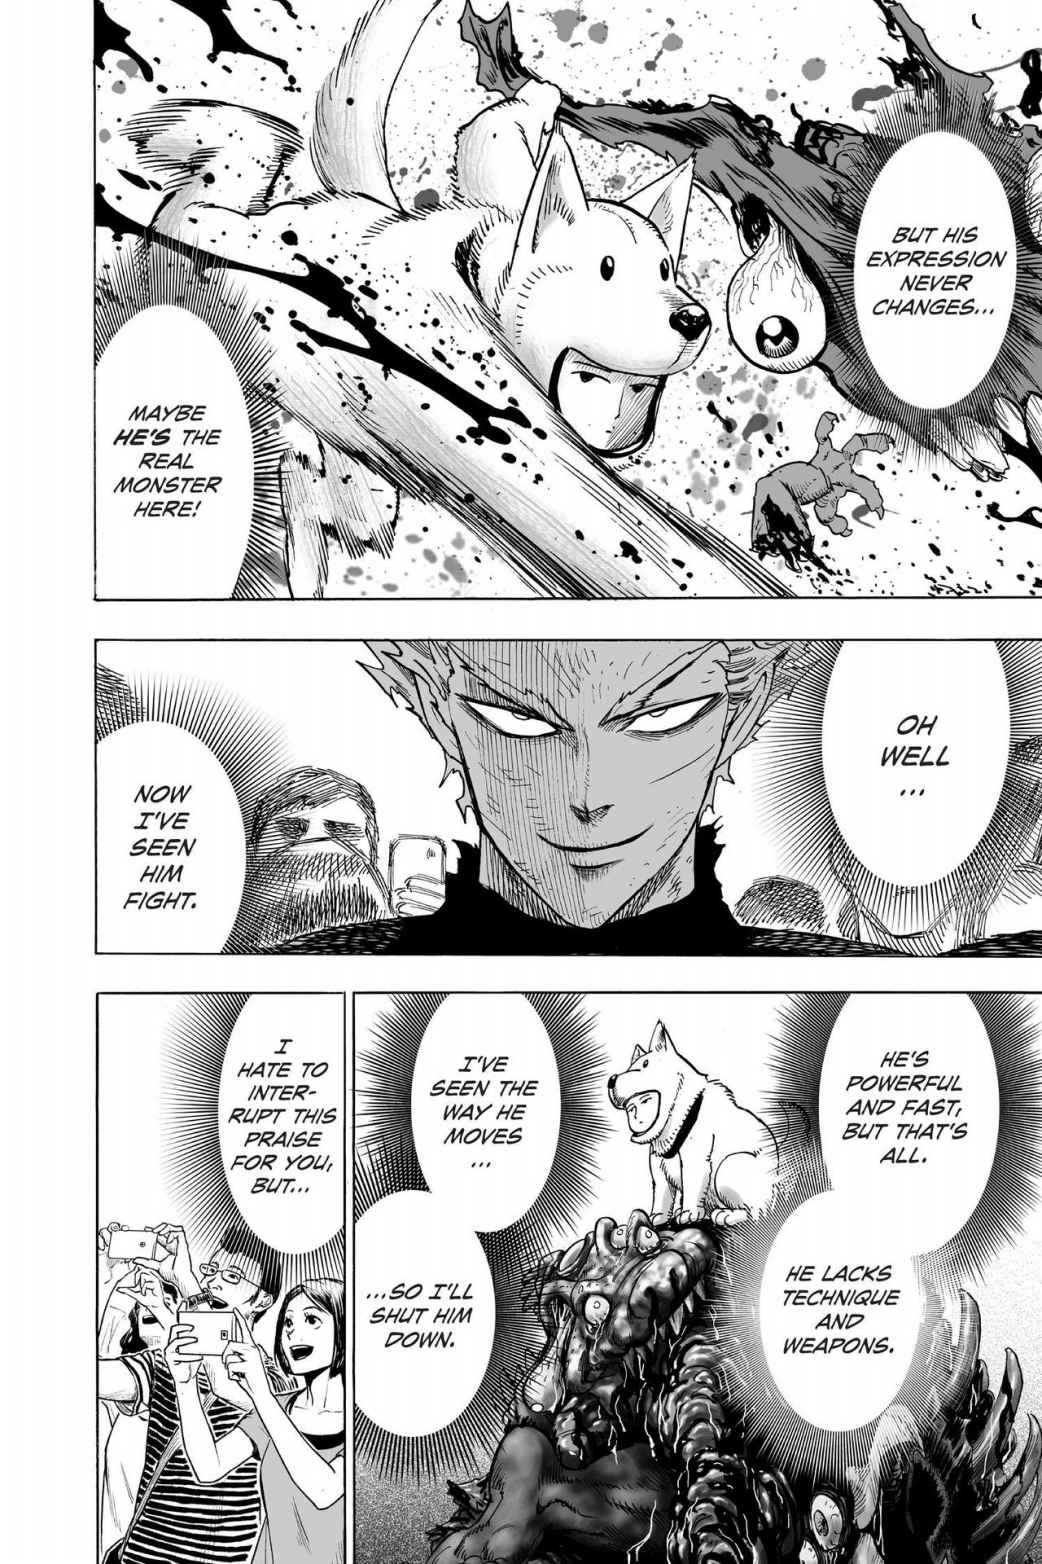 One-Punch Man, Punch 67 image 28